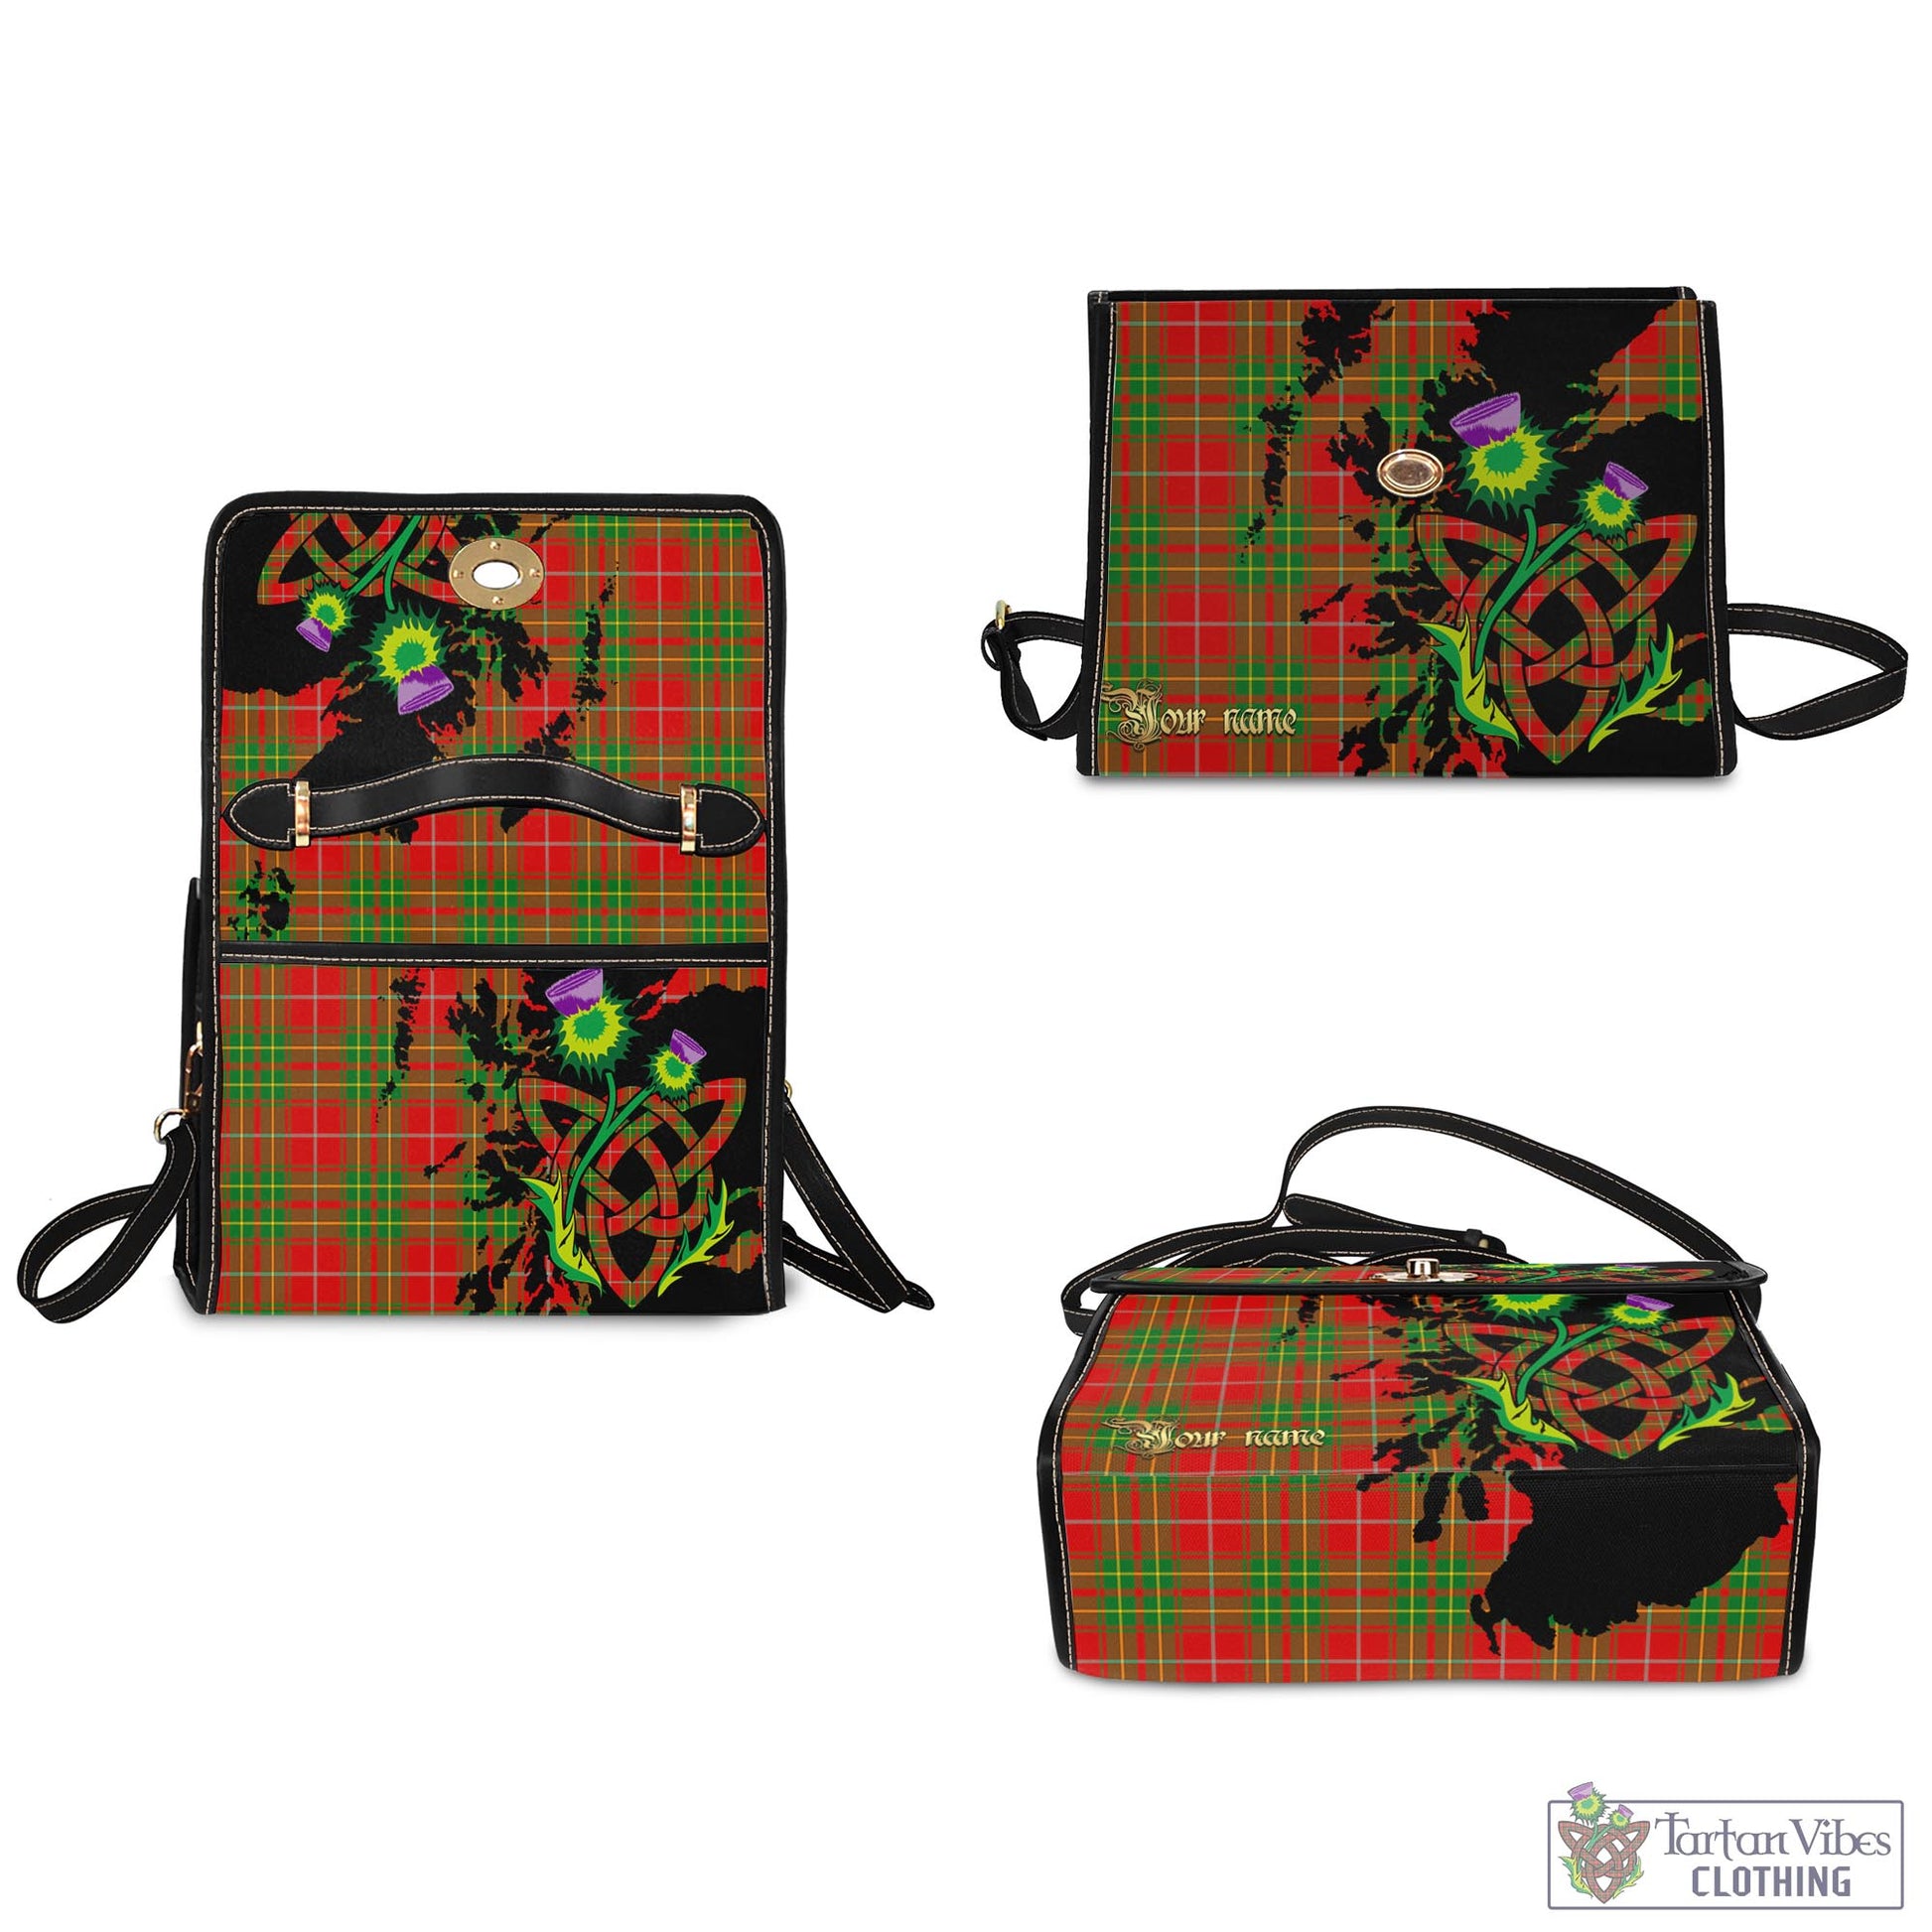 Tartan Vibes Clothing Burnett Ancient Tartan Waterproof Canvas Bag with Scotland Map and Thistle Celtic Accents